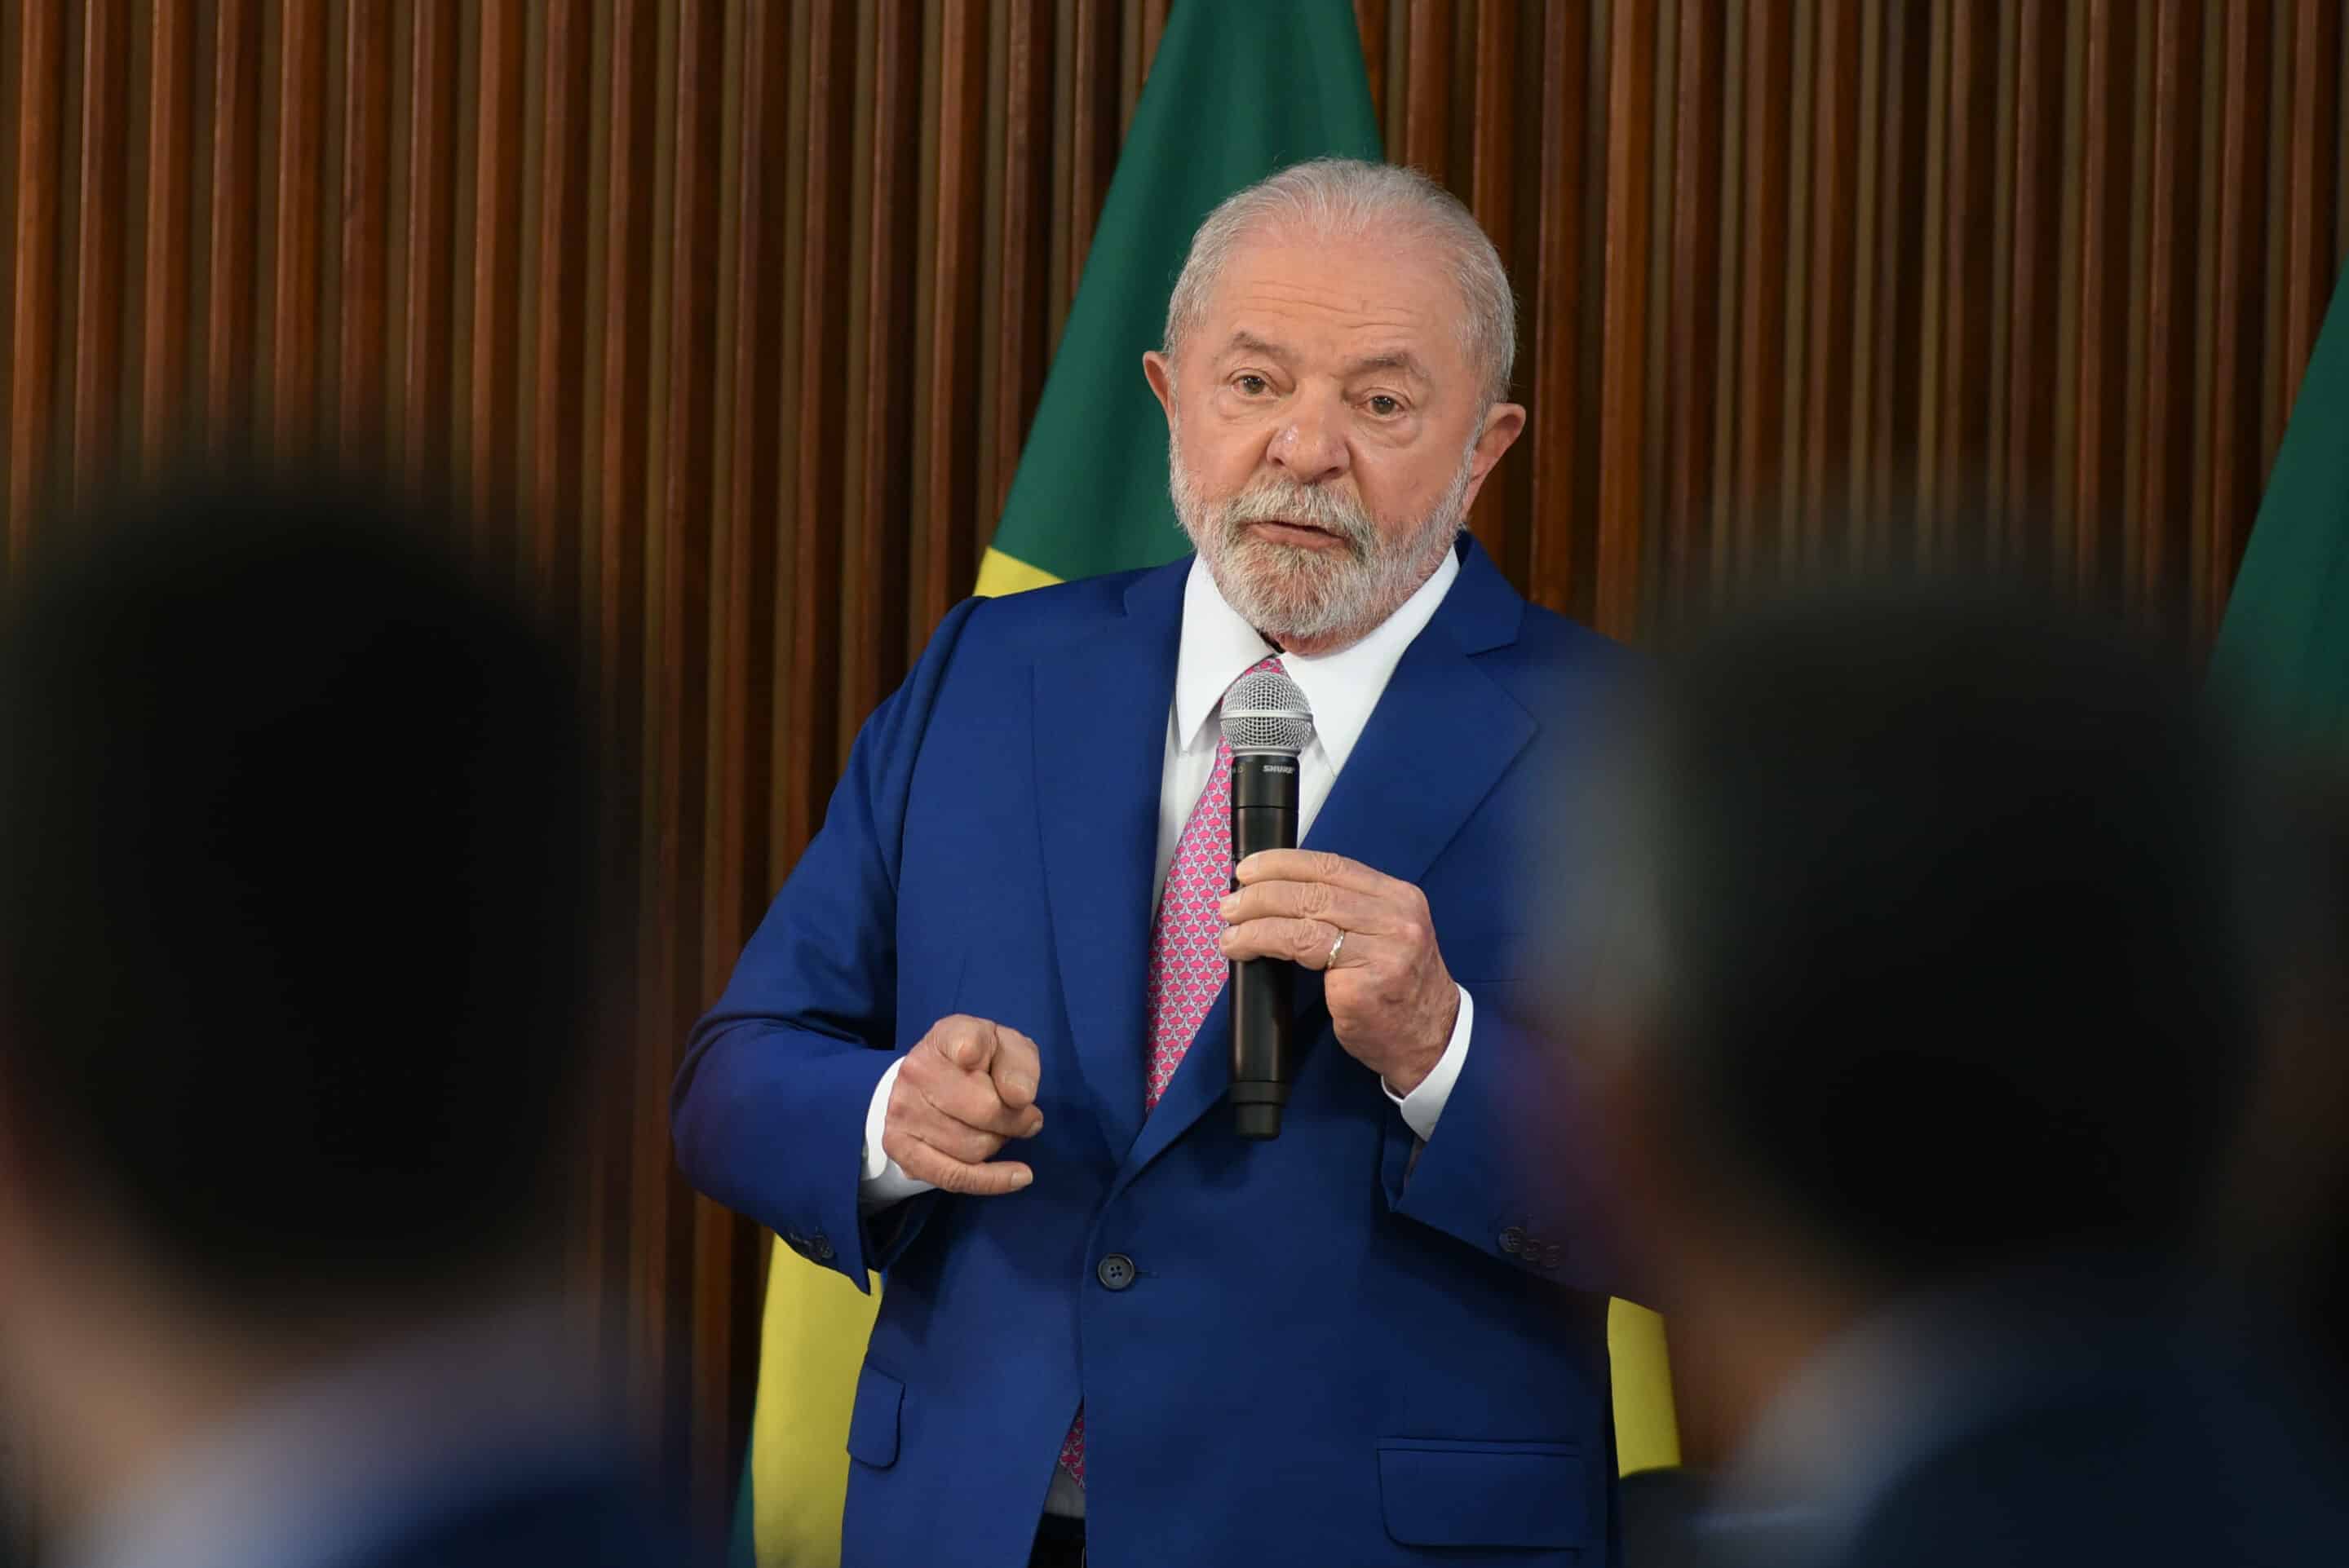 President Lula during the opening of the meeting with ministers. (Photo: Ton Molina/Fotoarena/Sipa USA)/43687990/Ton Molina/2301062011